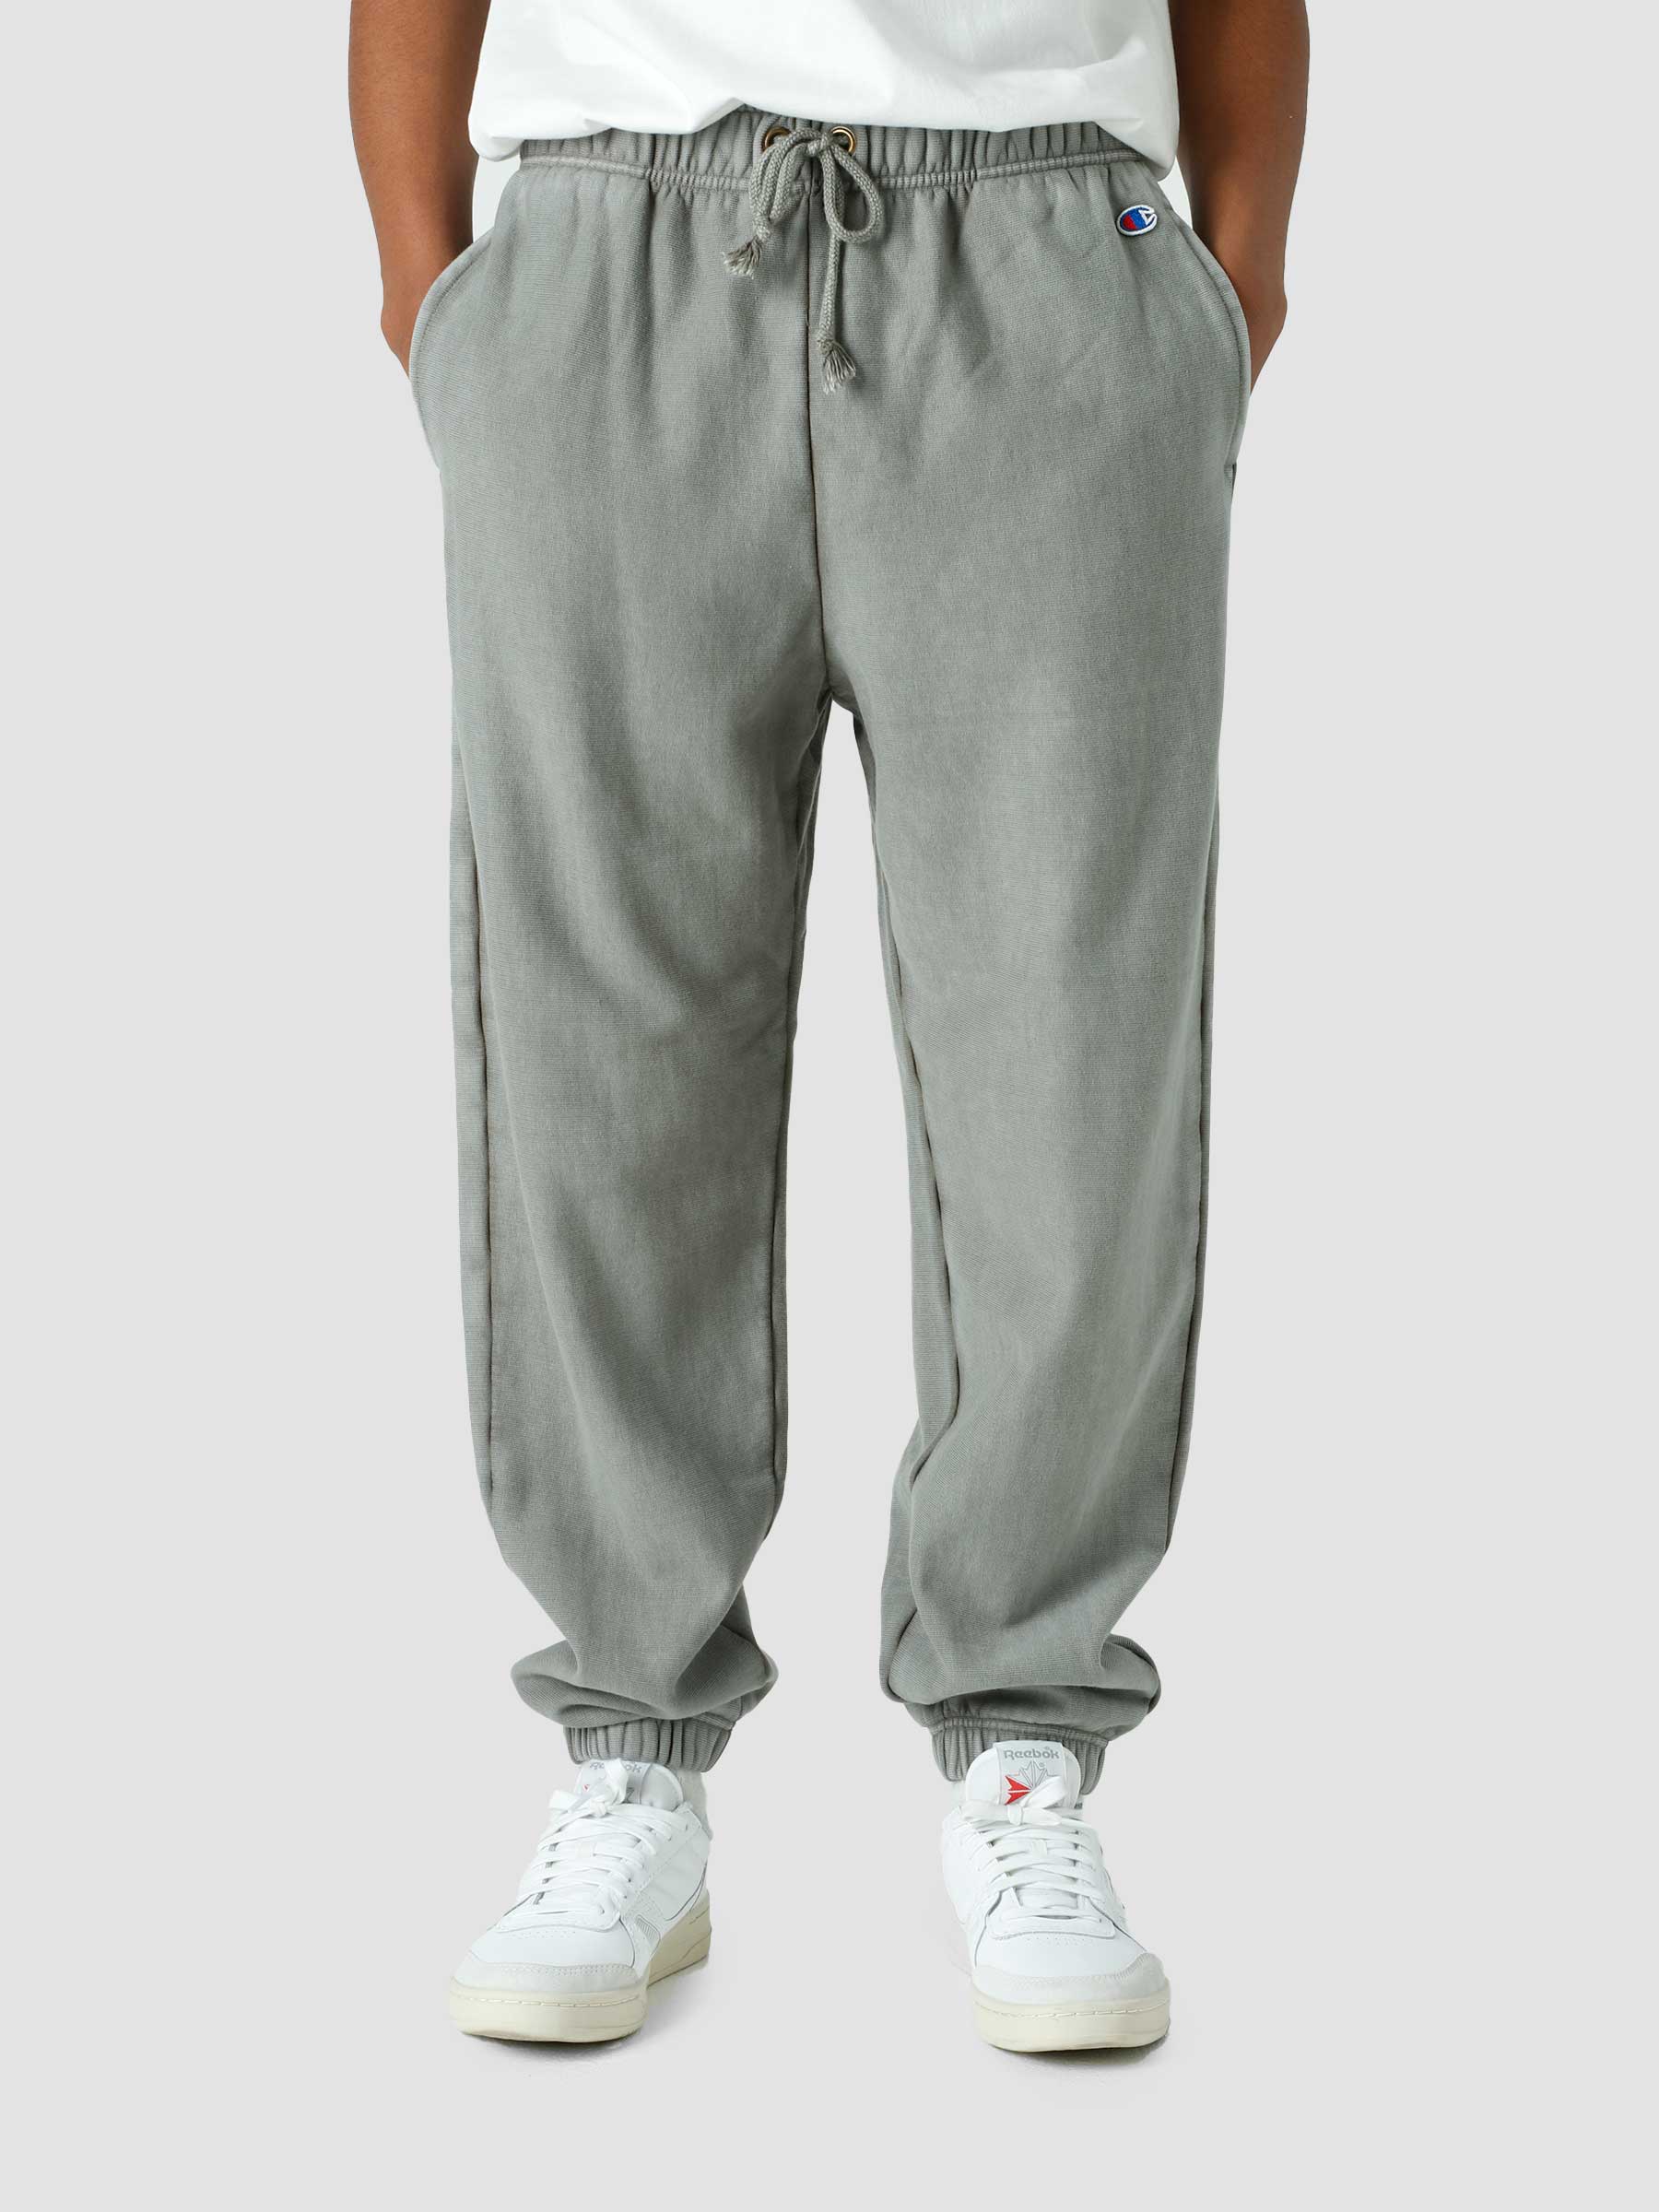 TCV Reverse Weave Poly Terry  Elastic Cuff Pants Grey 217242-GS014